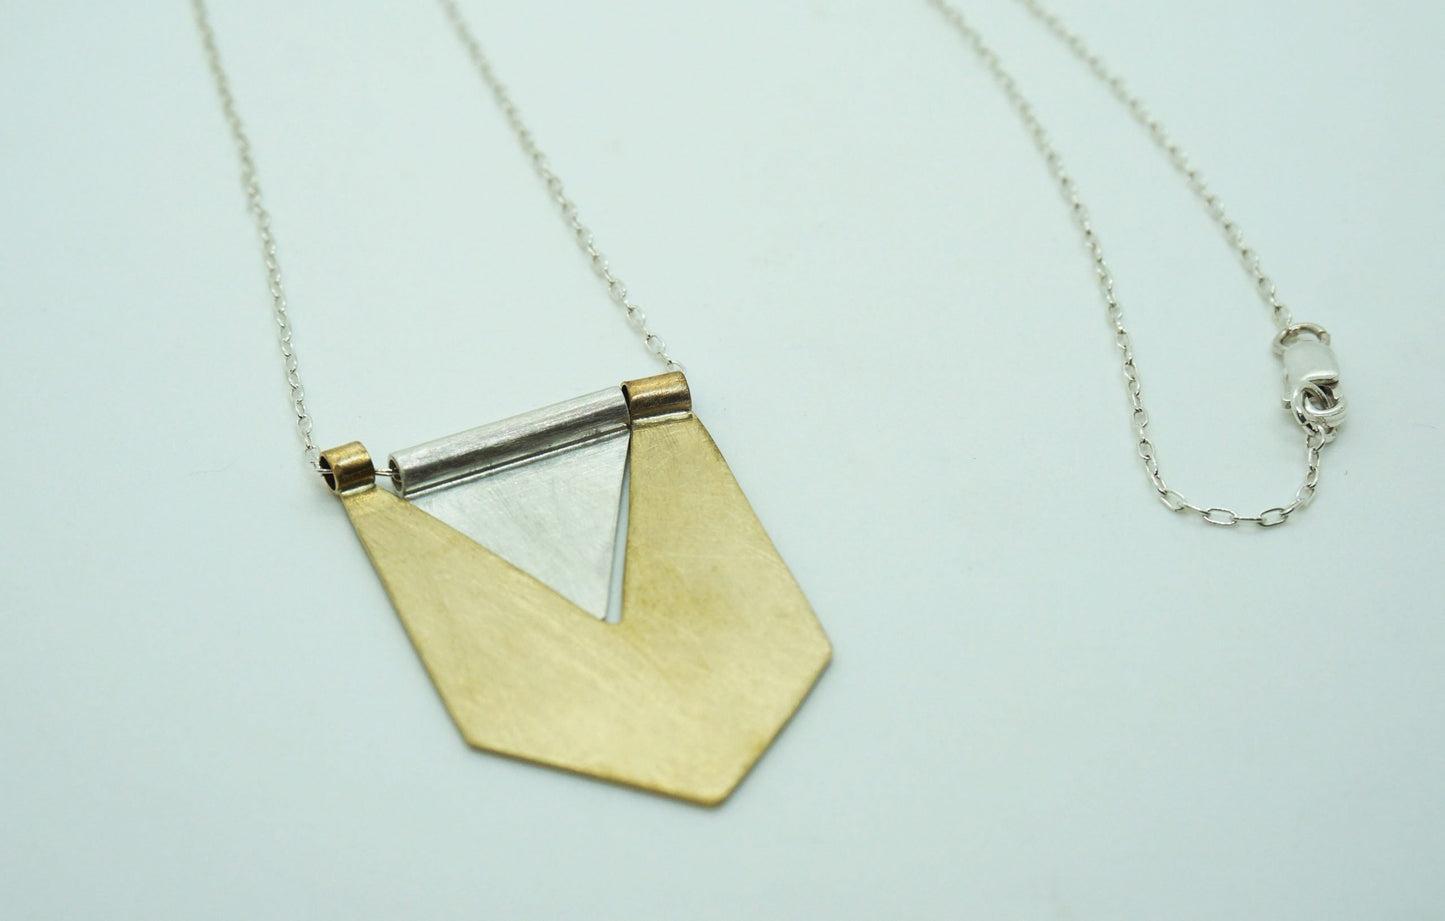 Brass and silver flag pendant necklace